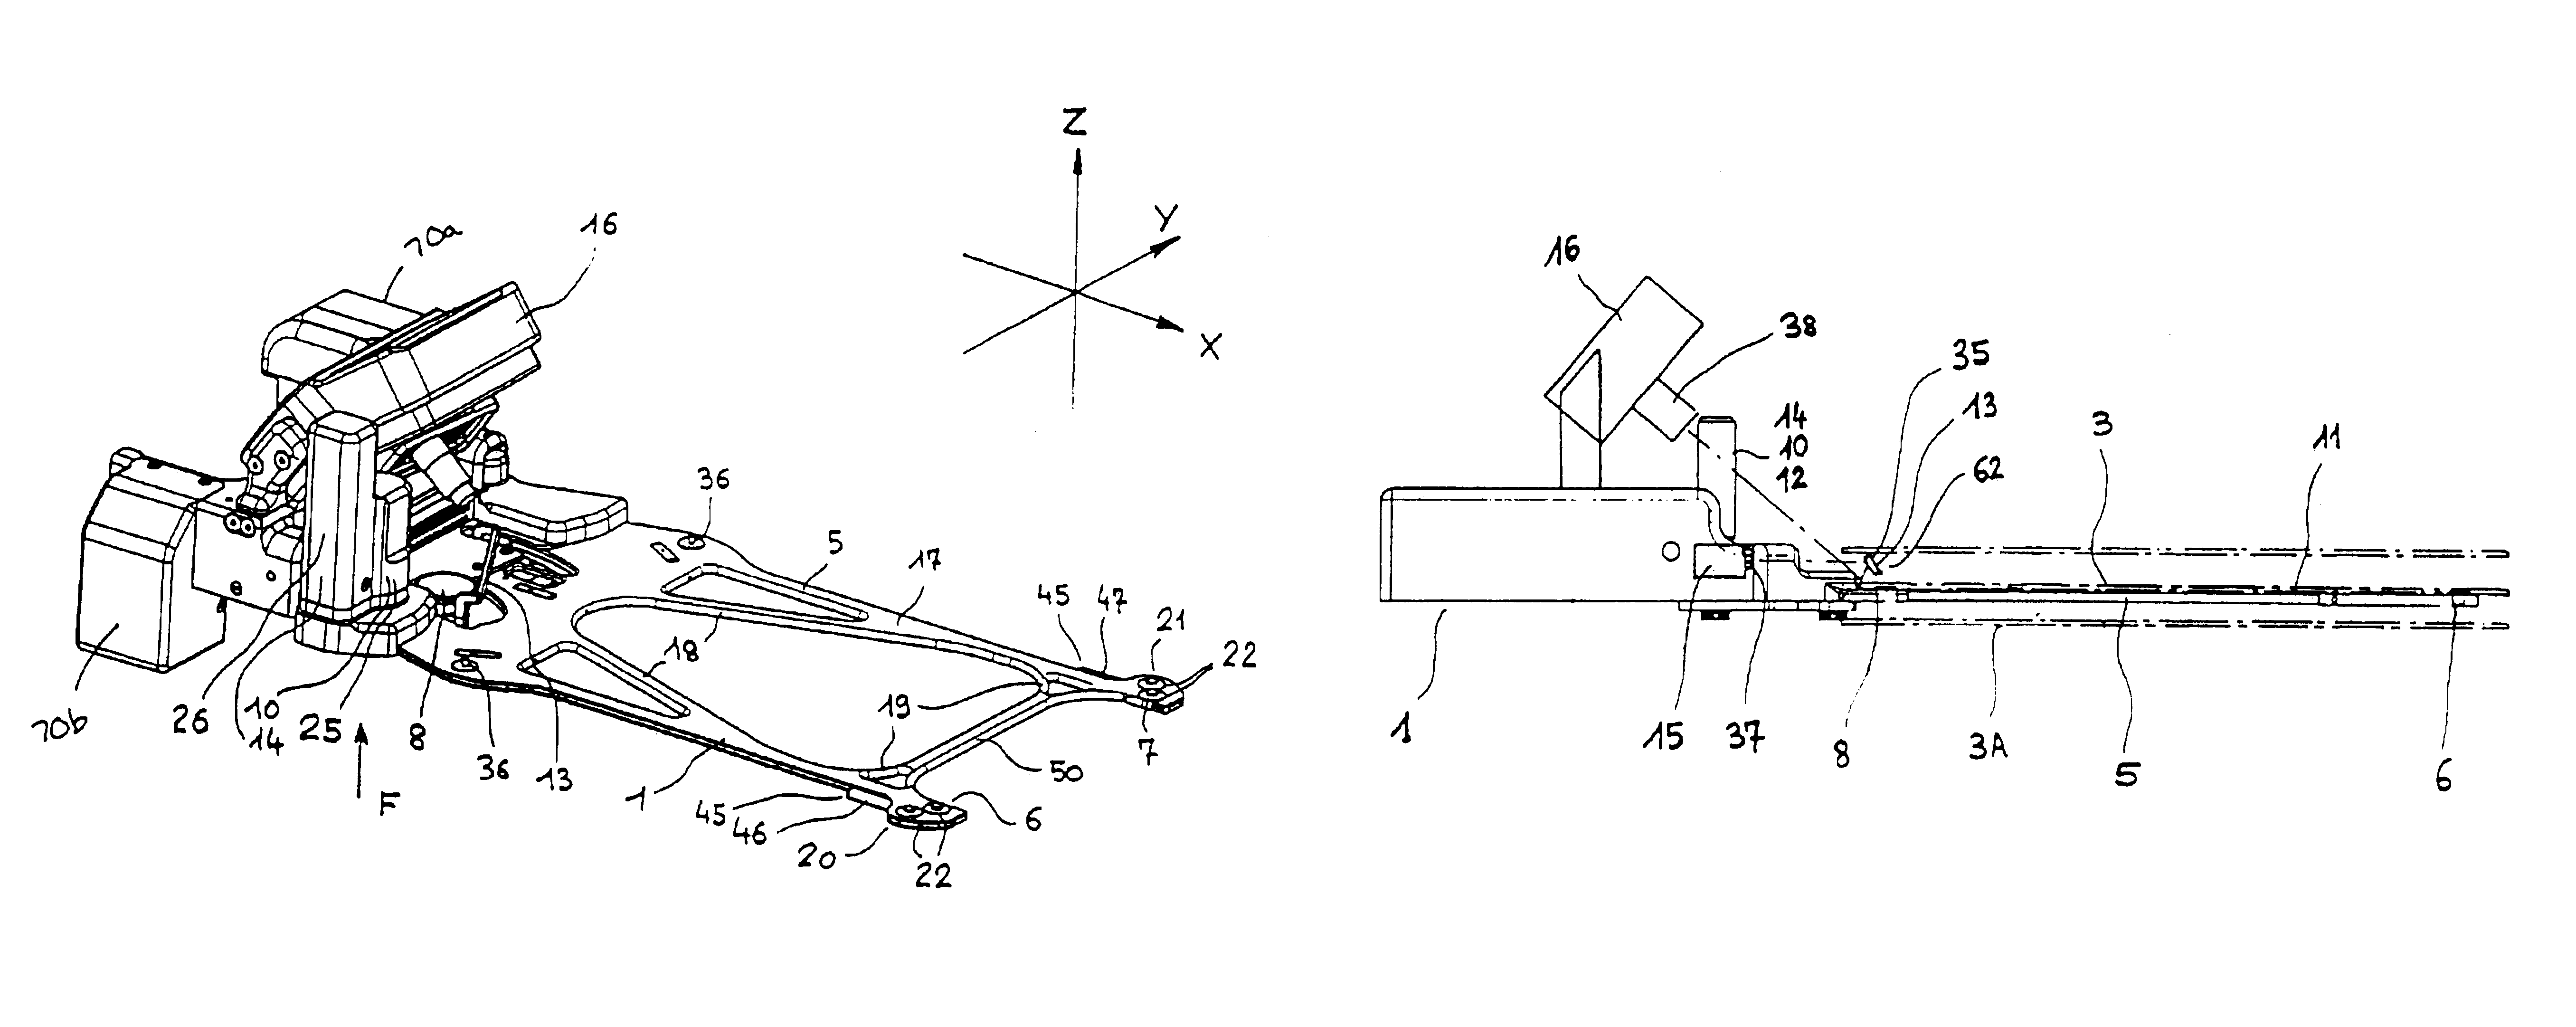 Apparatus and process for identification of characters inscribed on a semiconductor wafer containing an orientation mark